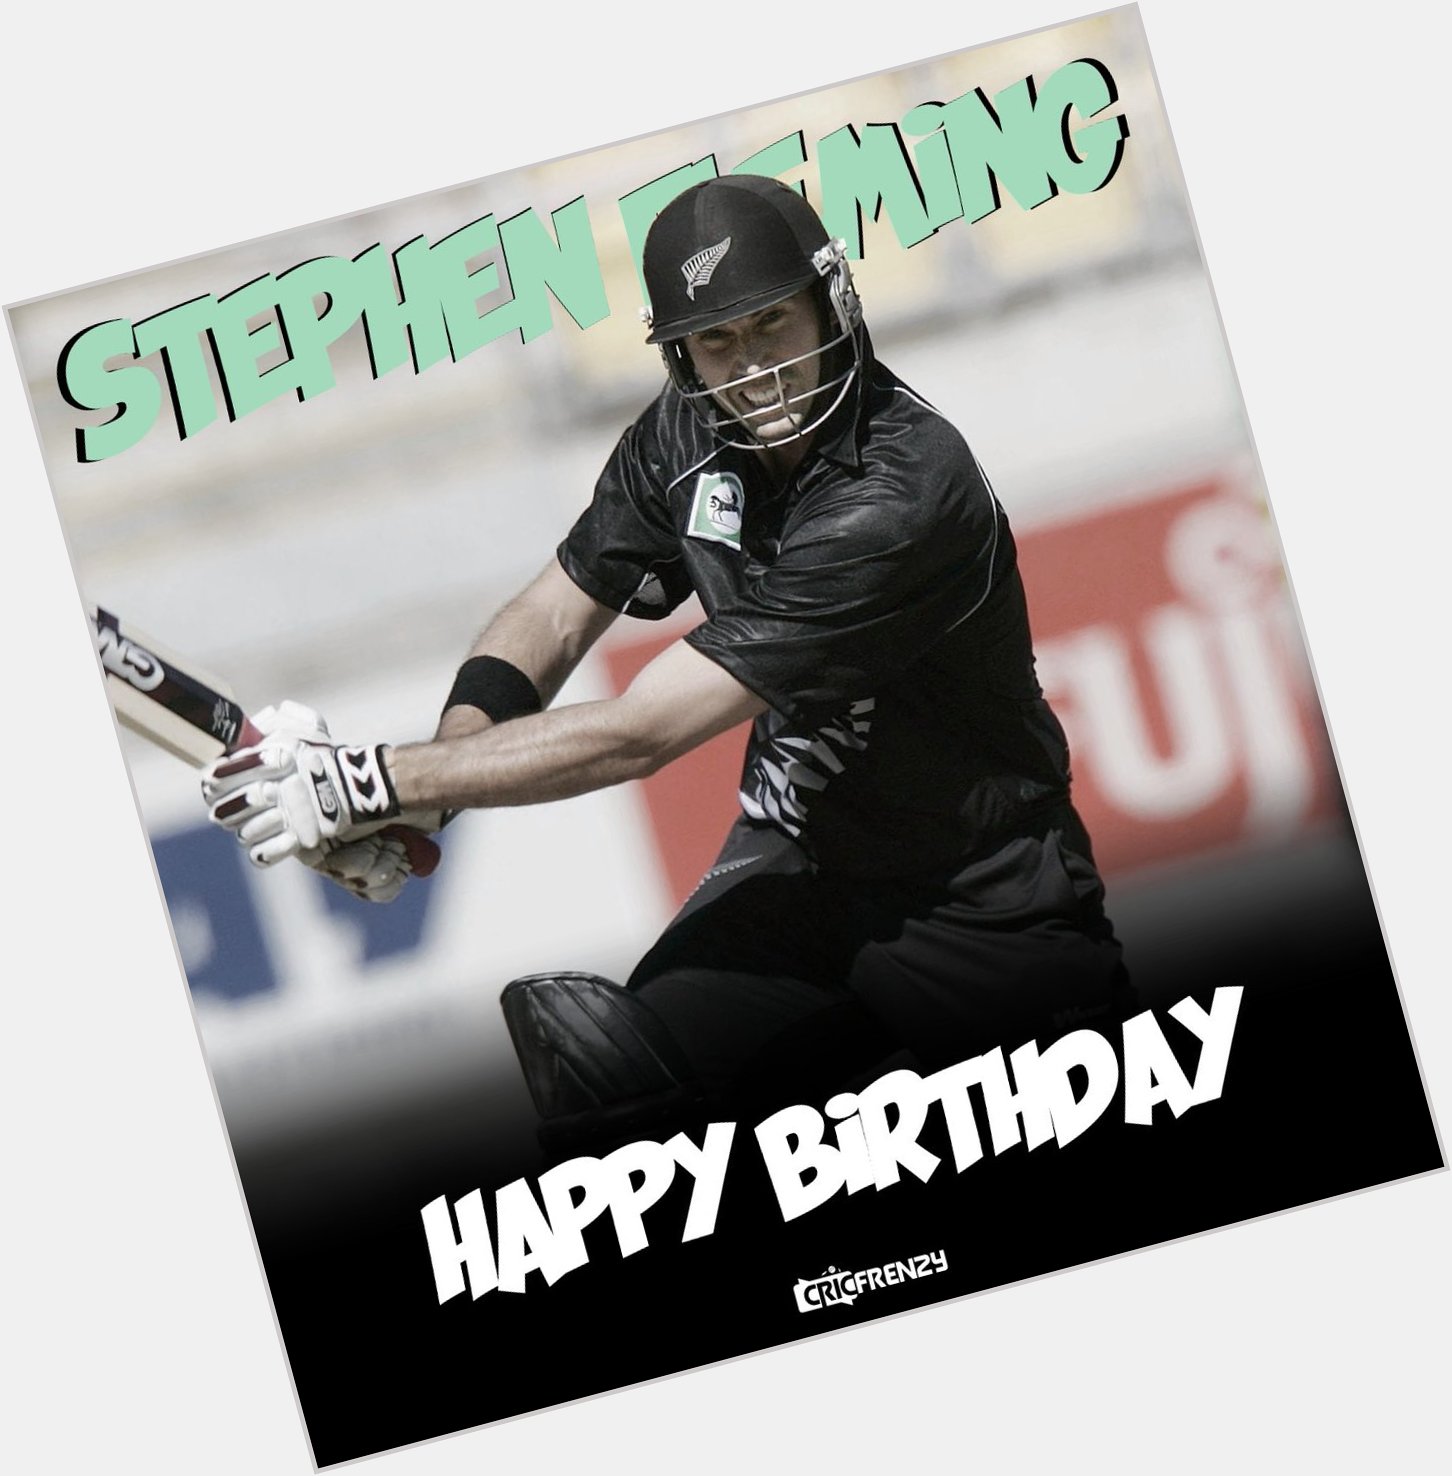 Second most capped ODI Captain (behind Ricky Ponting)
Happy birthday Stephen Fleming    